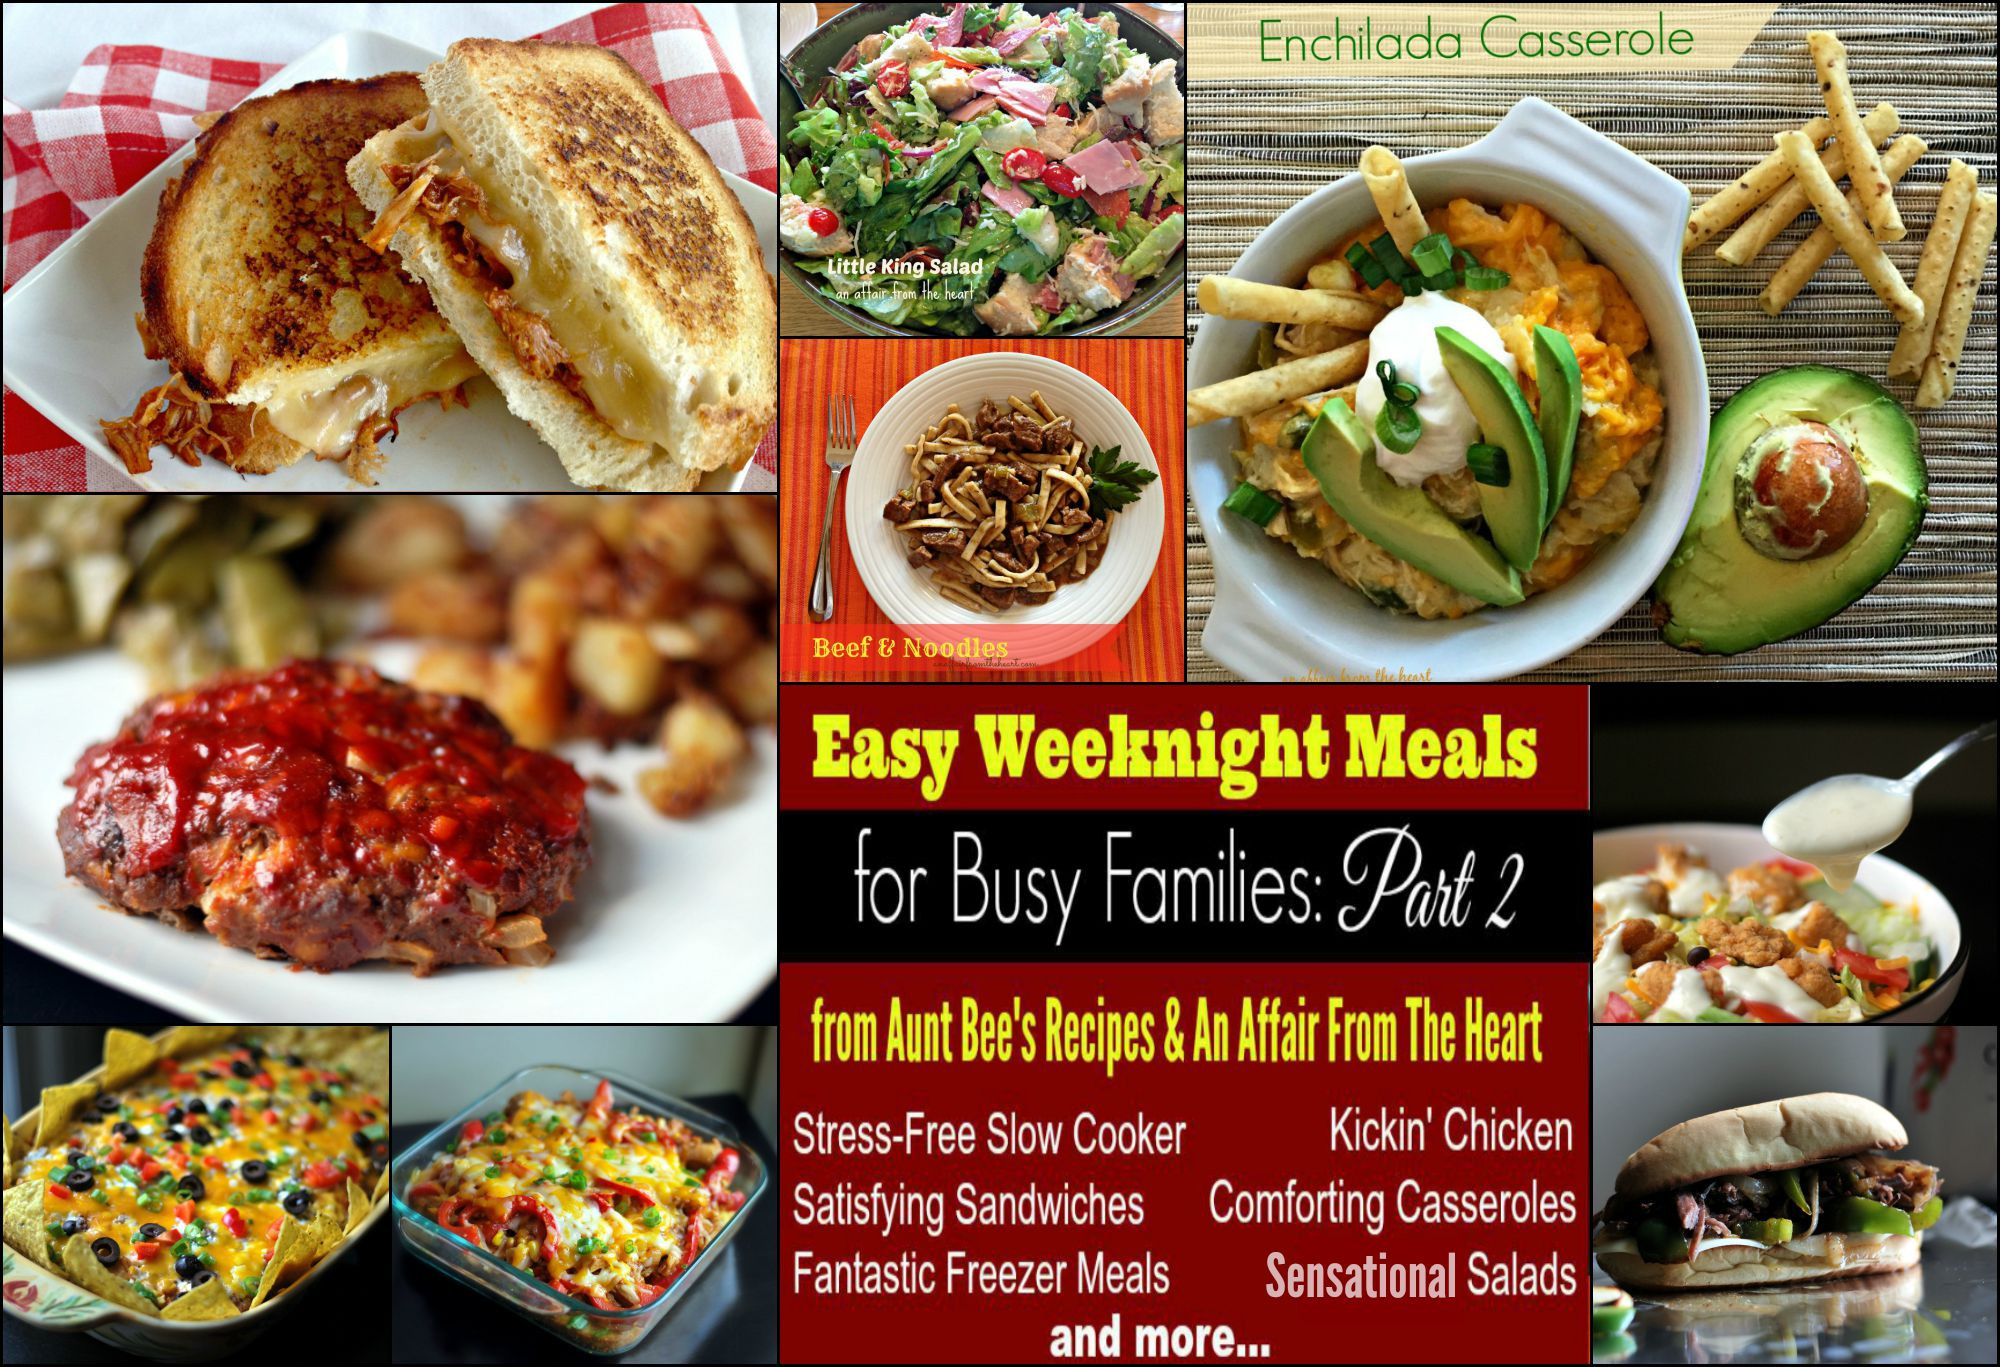 Easy Weeknight Dinners for Two Inspirational Easy Weeknight Meals for Busy Families Part 2 – Aunt Bee